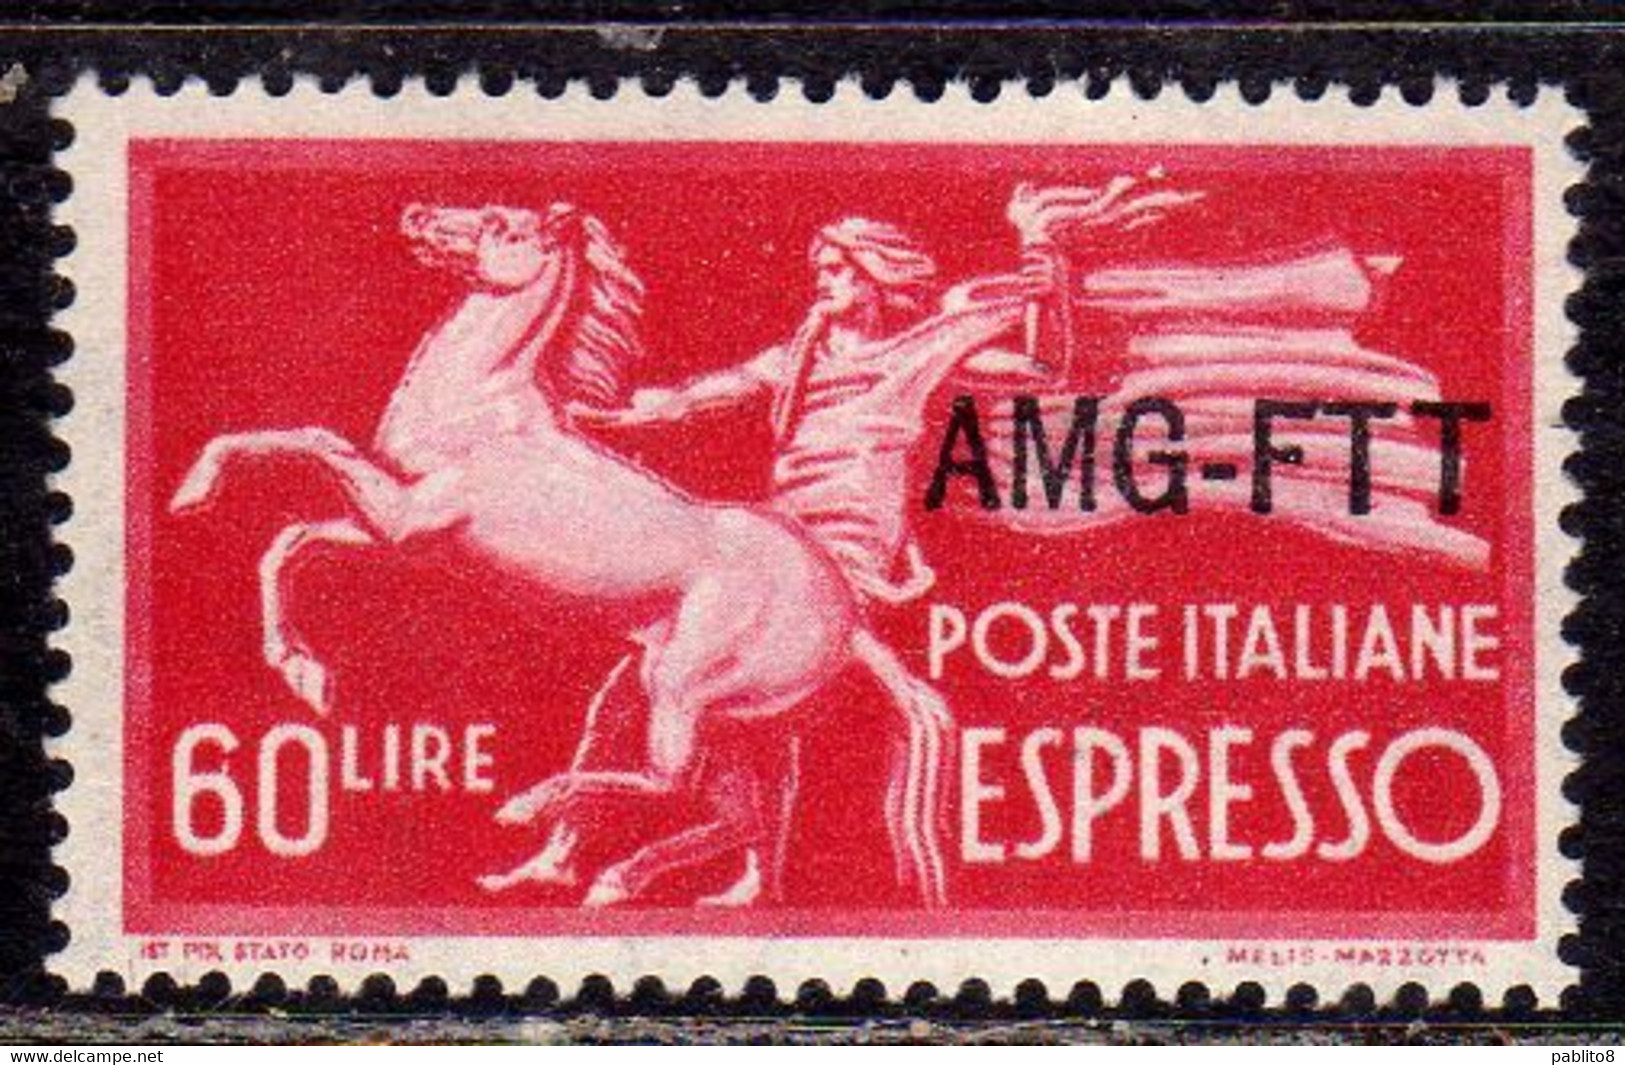 TRIESTE A 1950 AMG-FTT OVERPRINTED ESPRESSO SPECIAL DELIVERY LIRE 60 MNH BEN CENTRATO - Exprespost